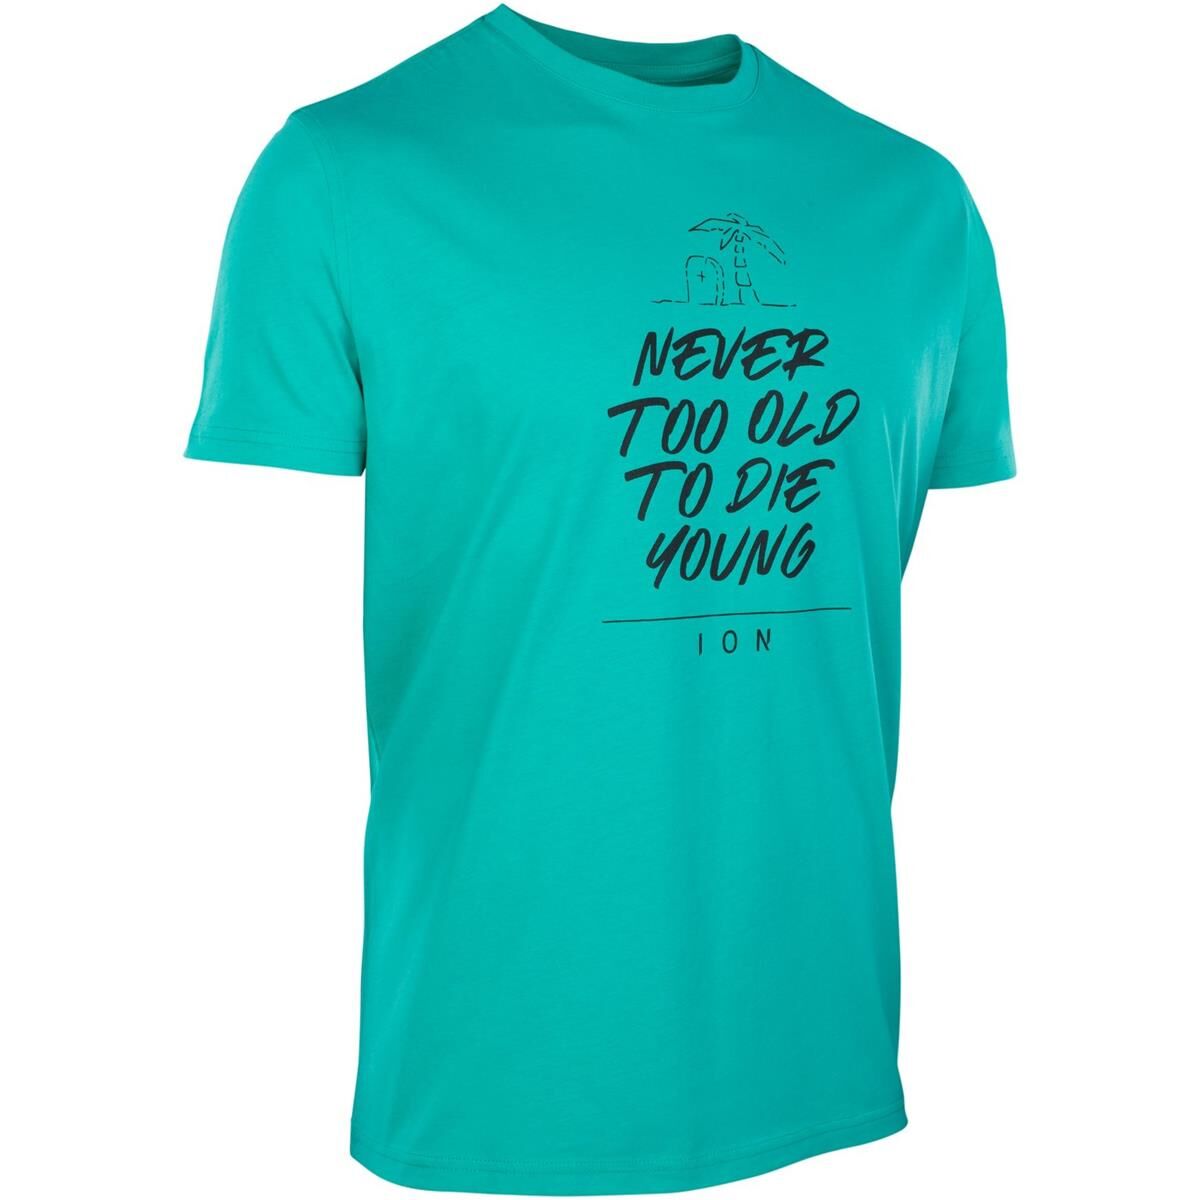 ION T-Shirt Never too old - S - Turquoise